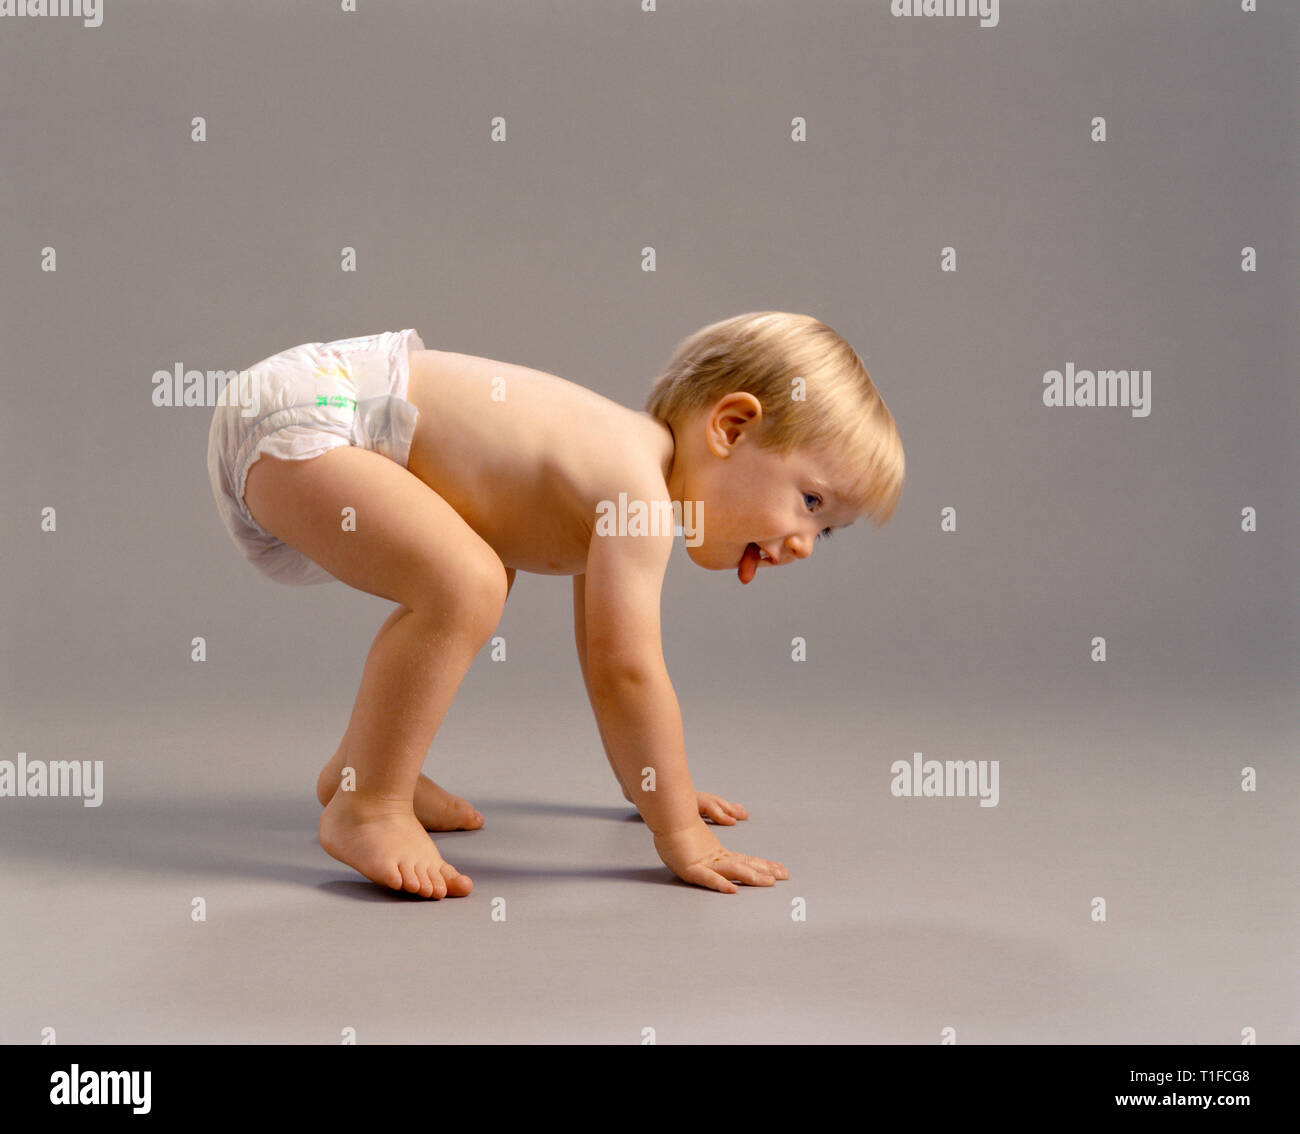 Child taking early steps. Stock Photo